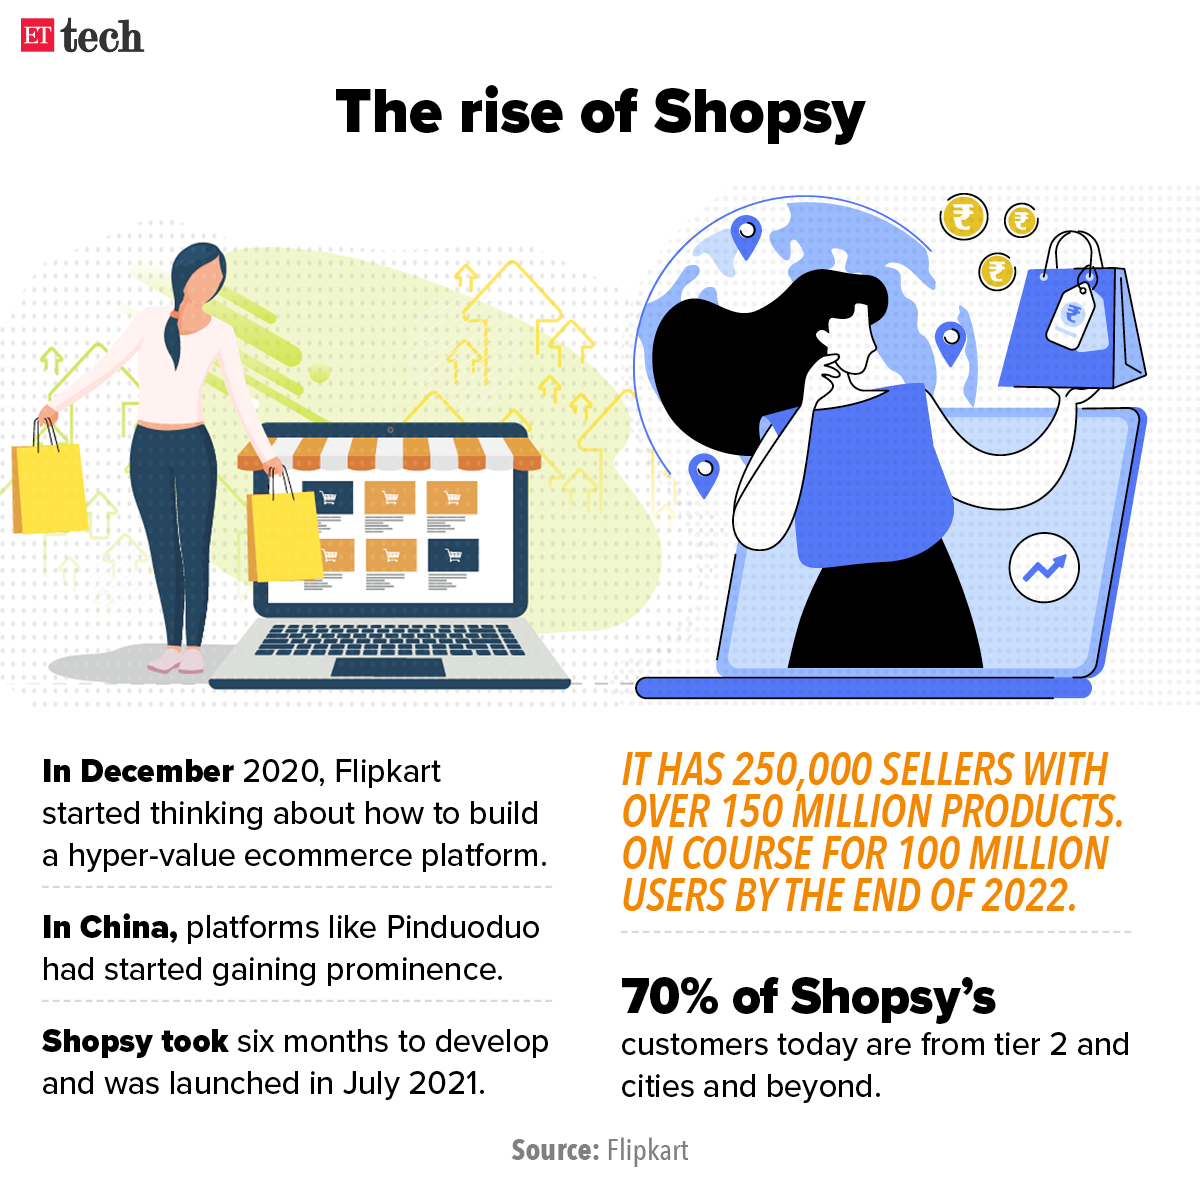 The rise of Shopsy